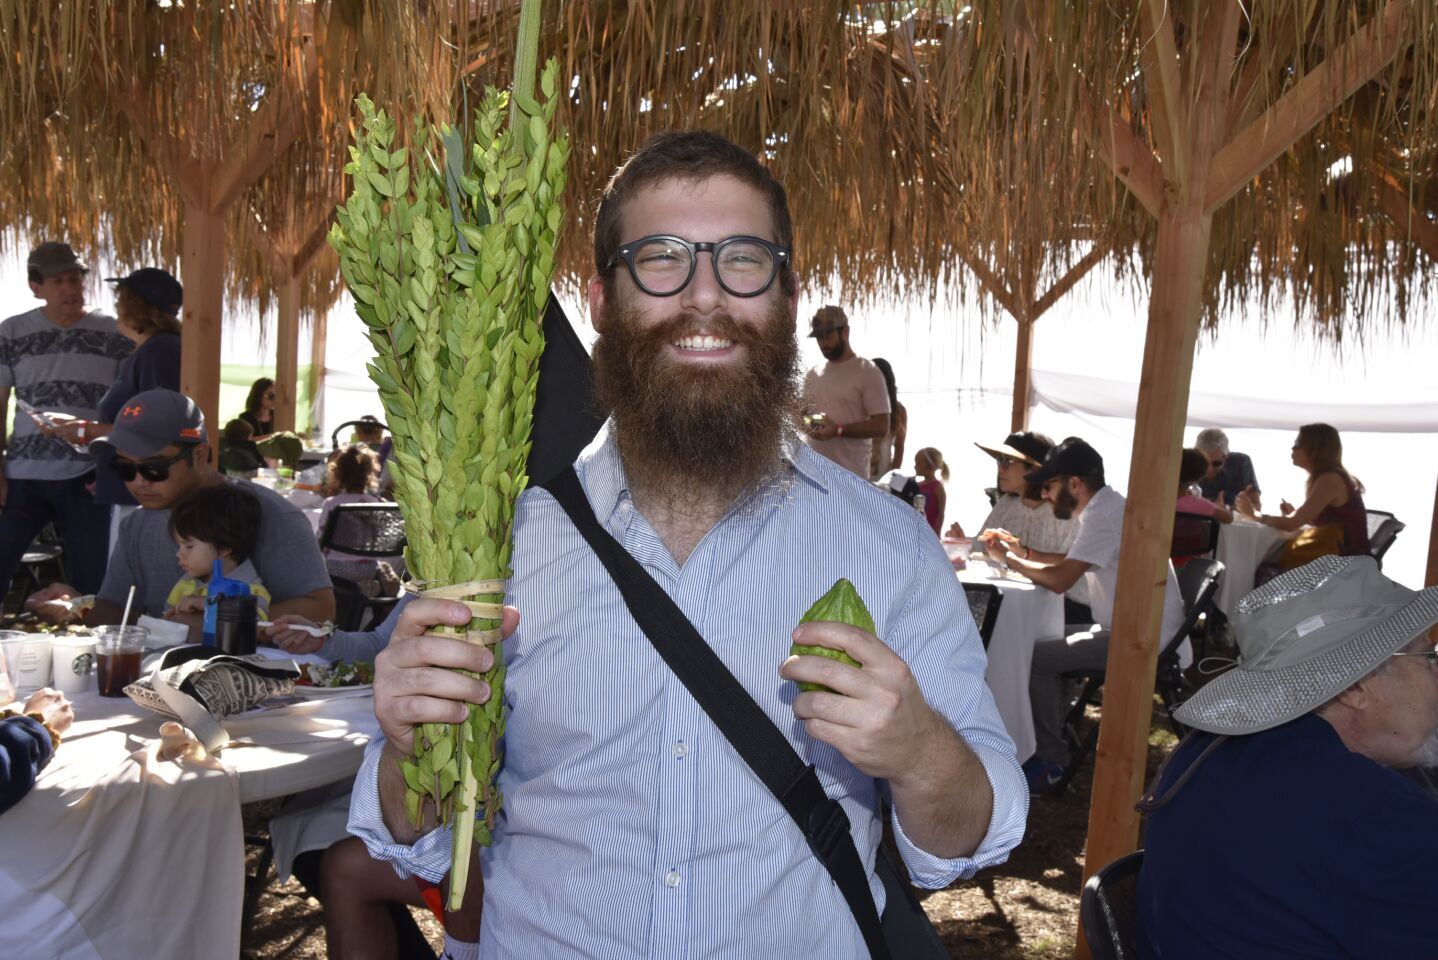 Rabbi Yossi Rodal with the Sukkot Lulav and Etrog, one of the main symbols of the holiday